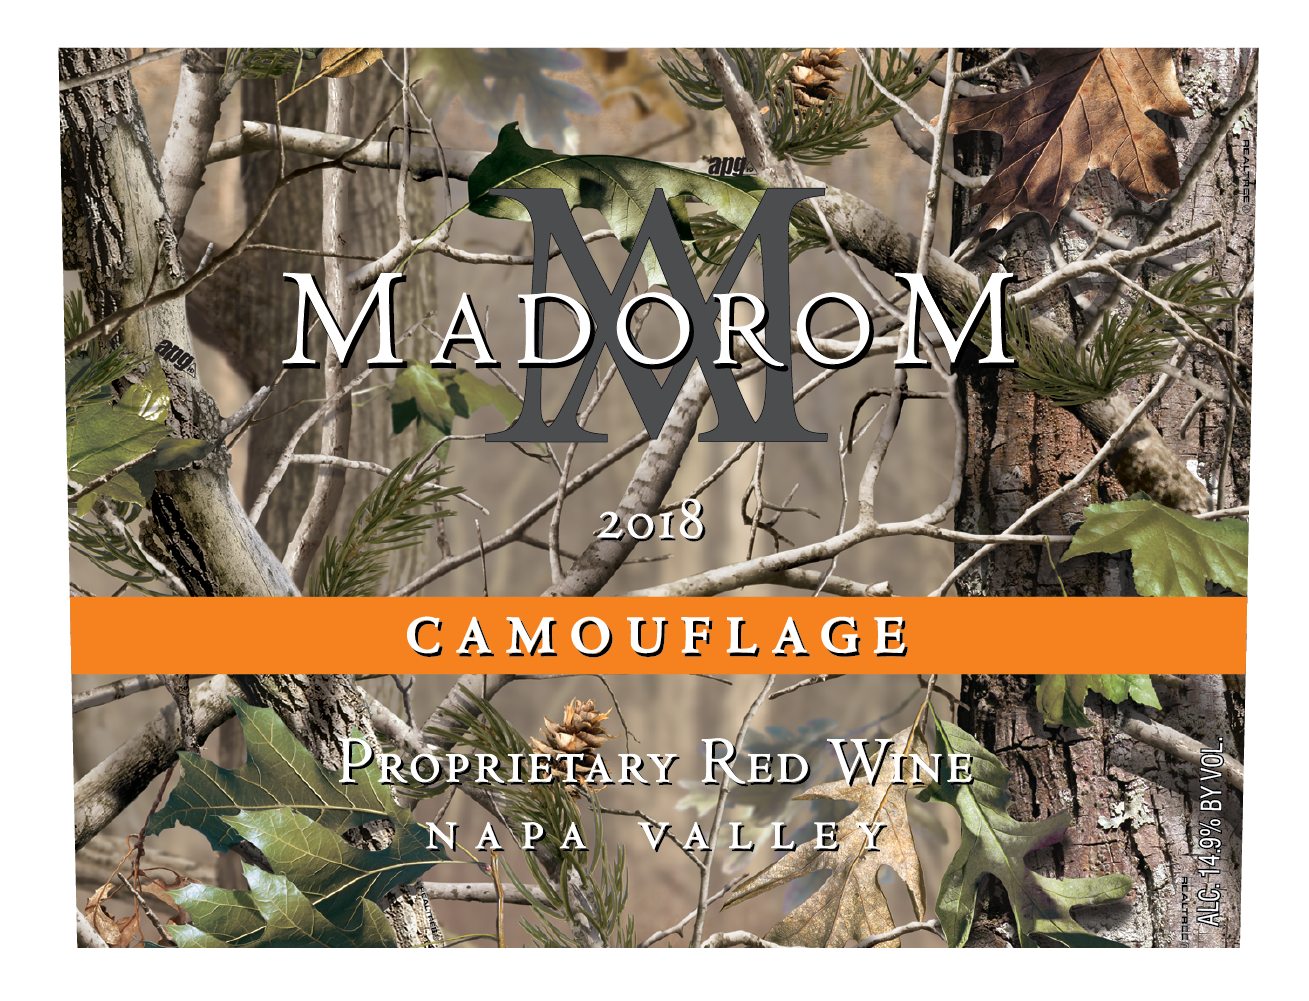 Product Image for 2018 MadoroM Napa Valley Camouflage Proprietary Red Blend